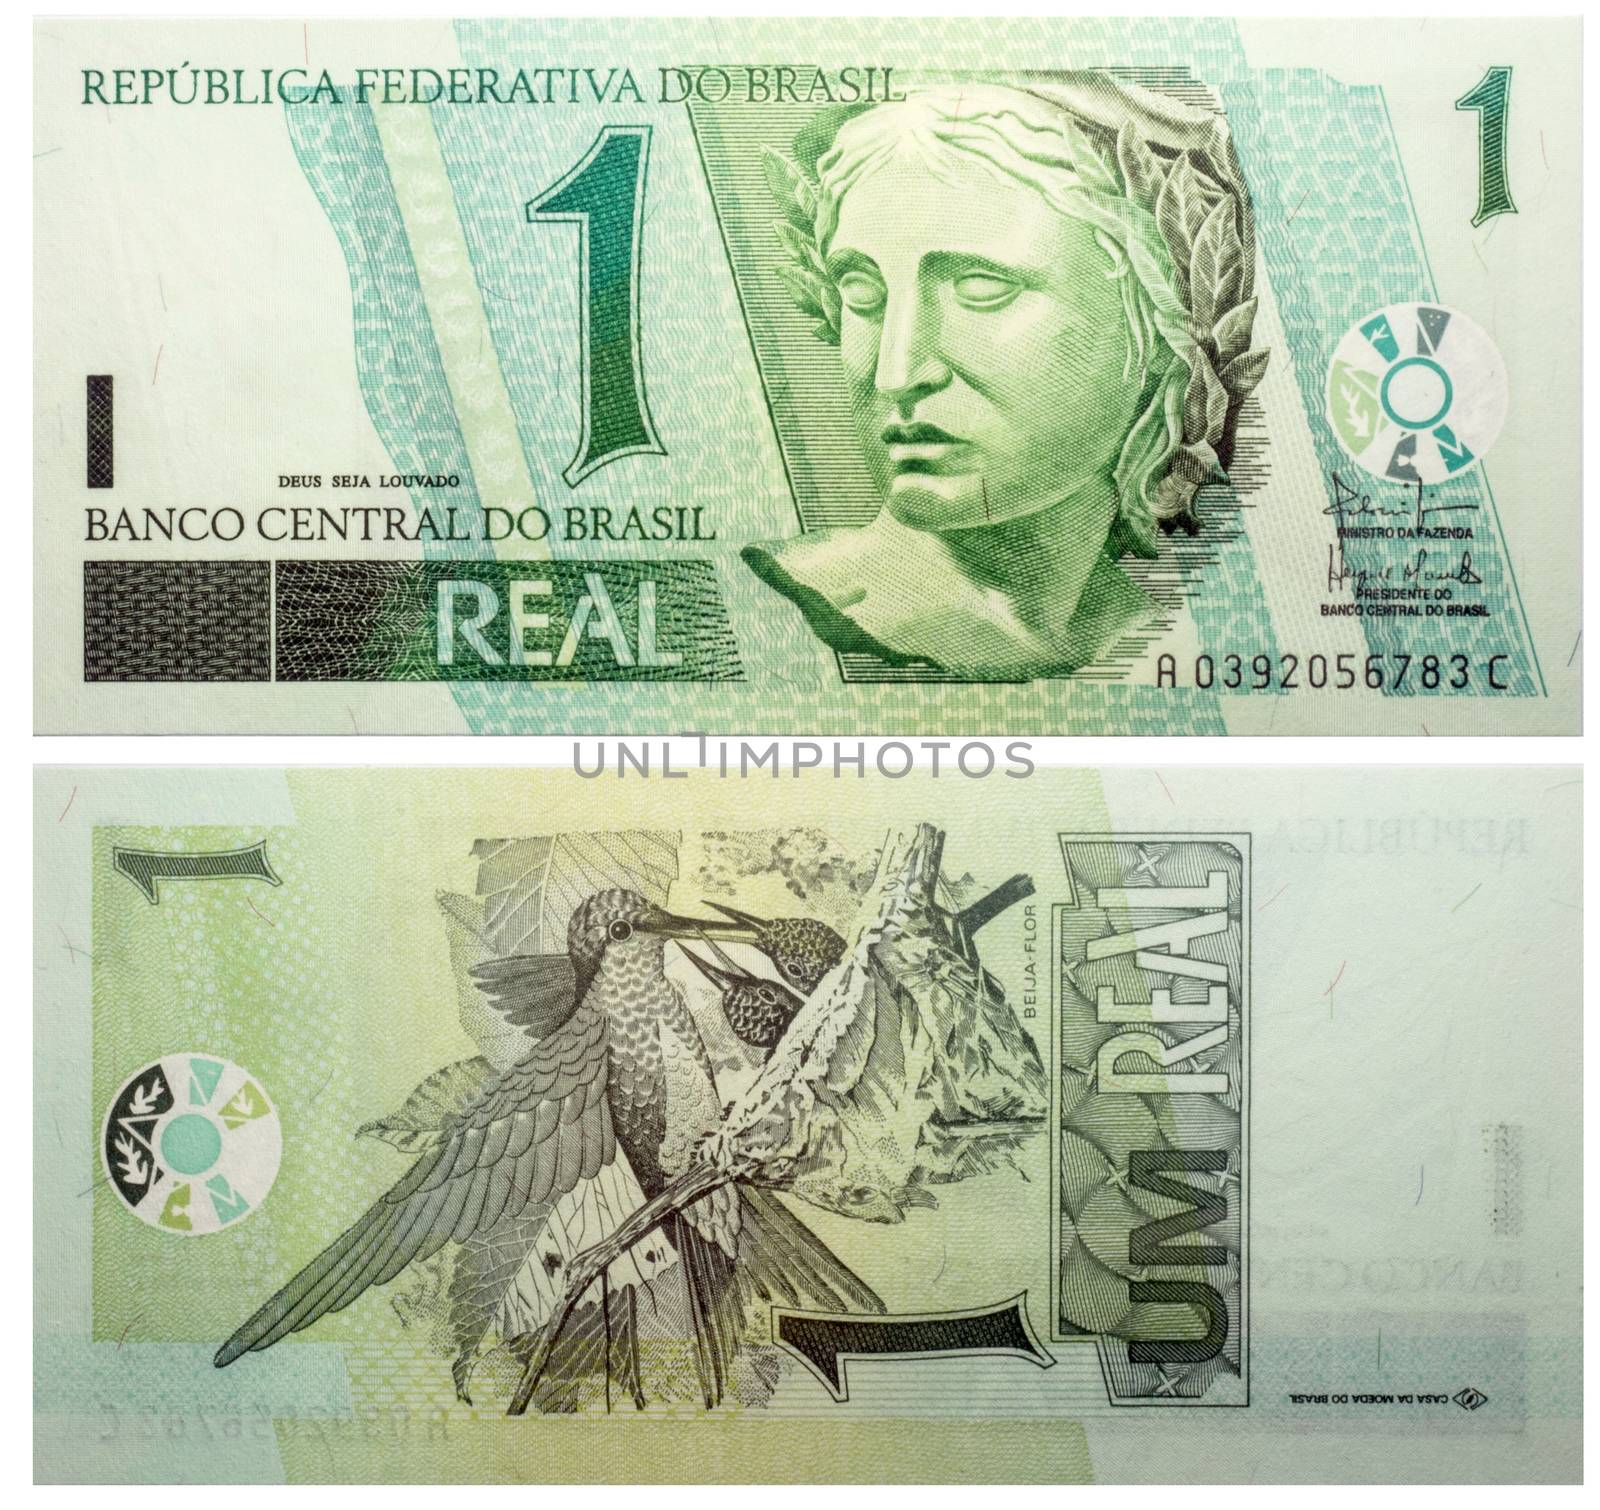 1 Real banknote Brasil front and back UNC emitted on 1994